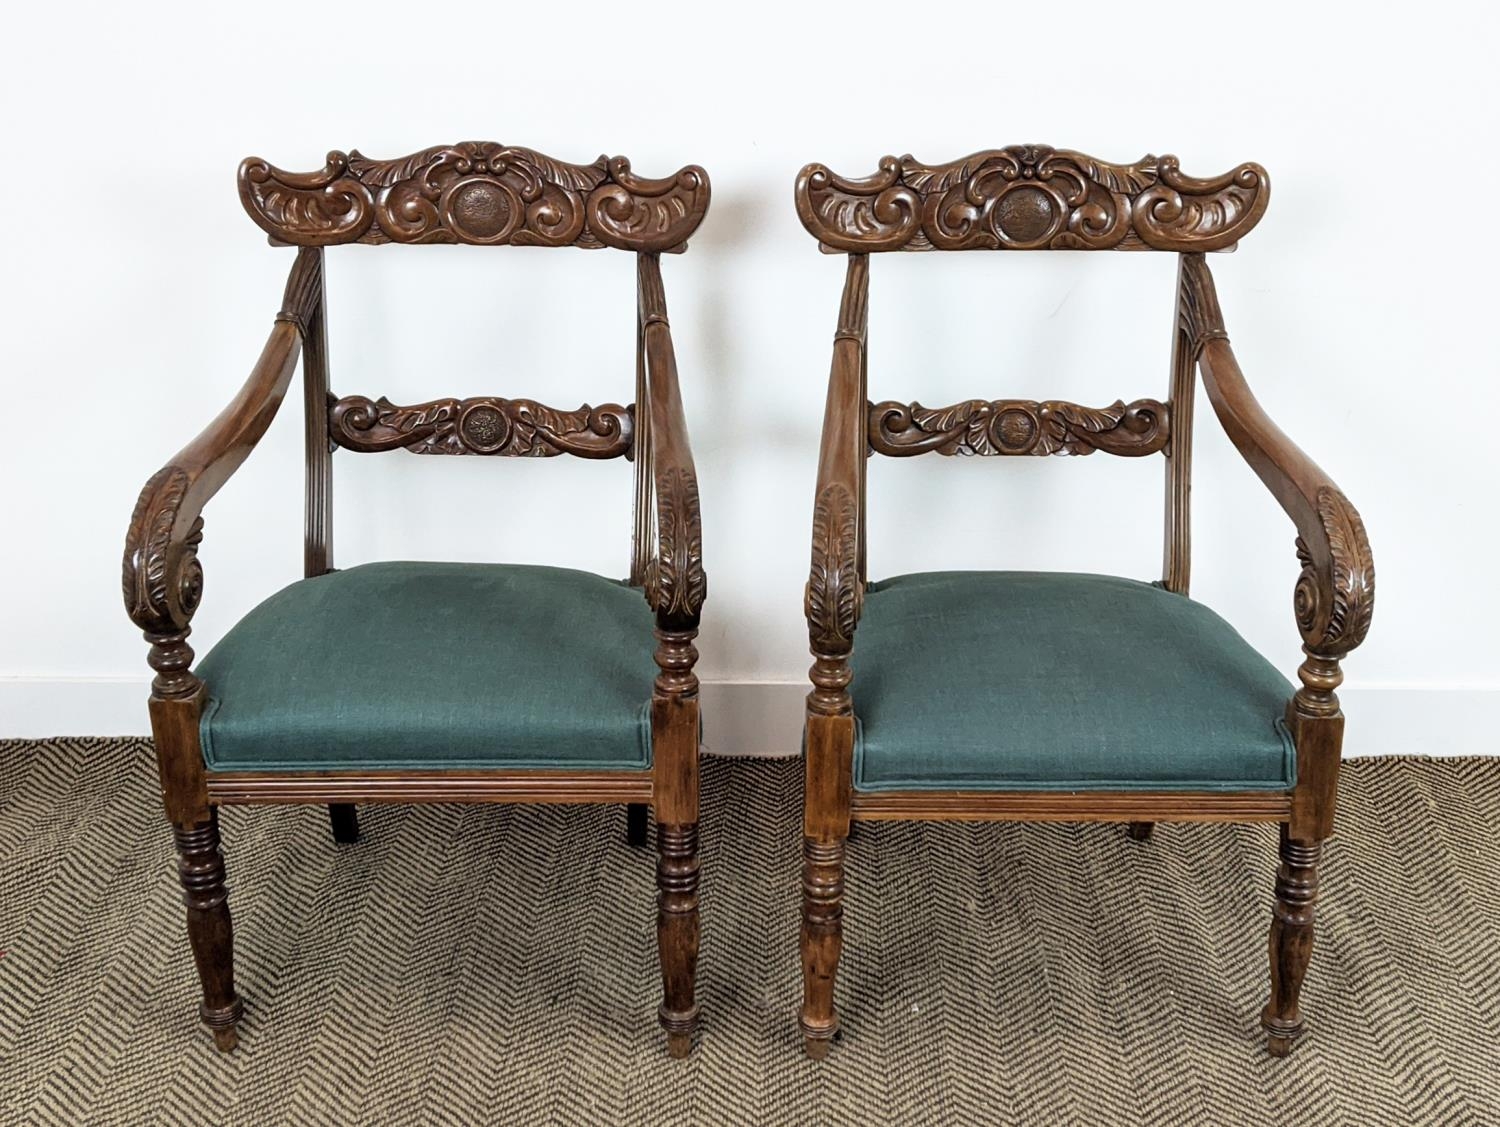 ARMCHAIRS, a pair, mid 19th century mahogany with green stuffover seats, 91cm H x 58cm x 58cm. (2) - Image 3 of 18